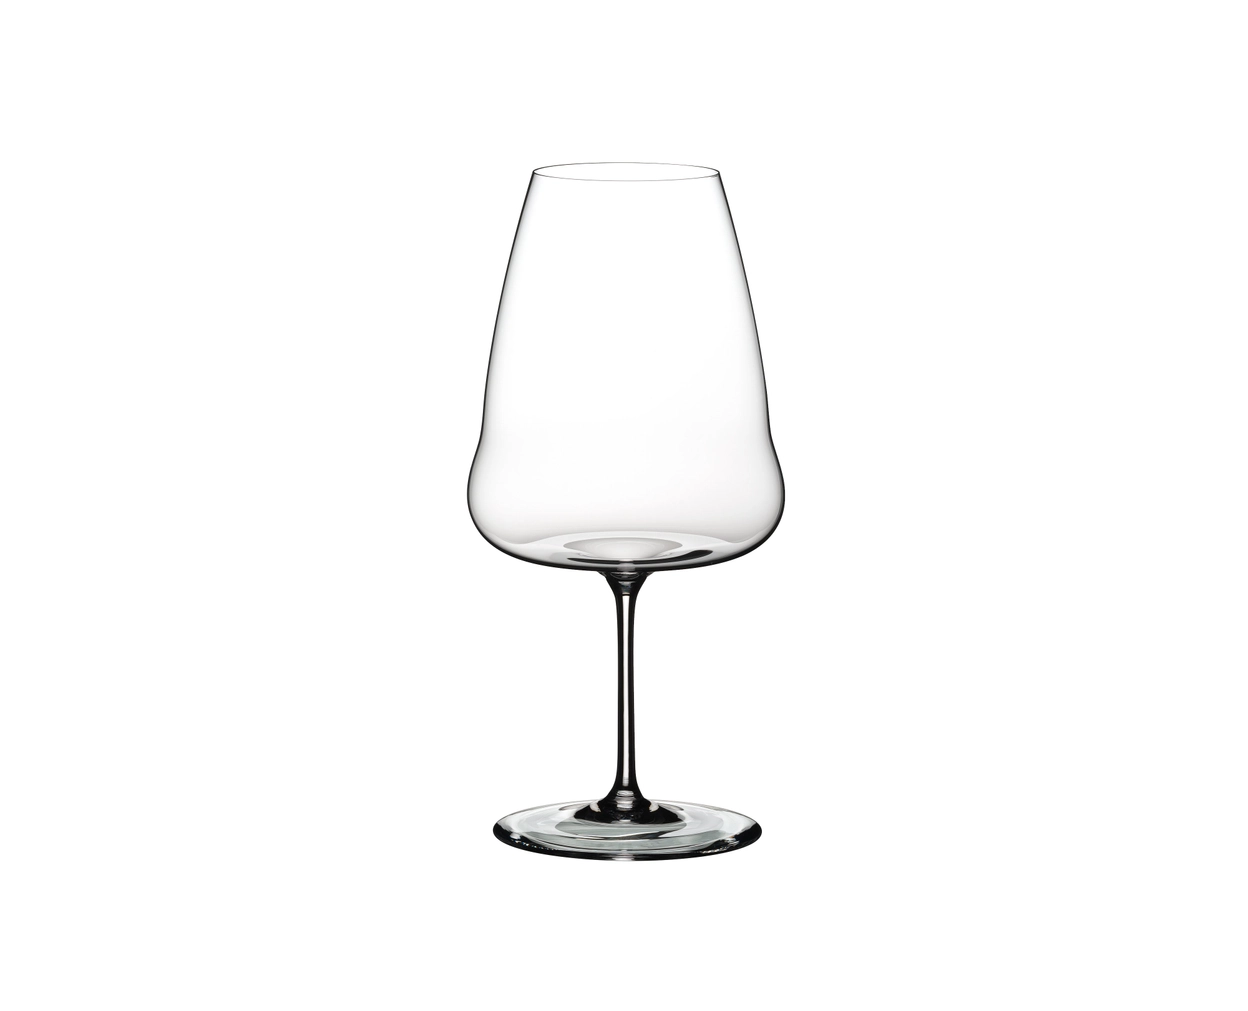 Riedel High Winewings Riesling Glass